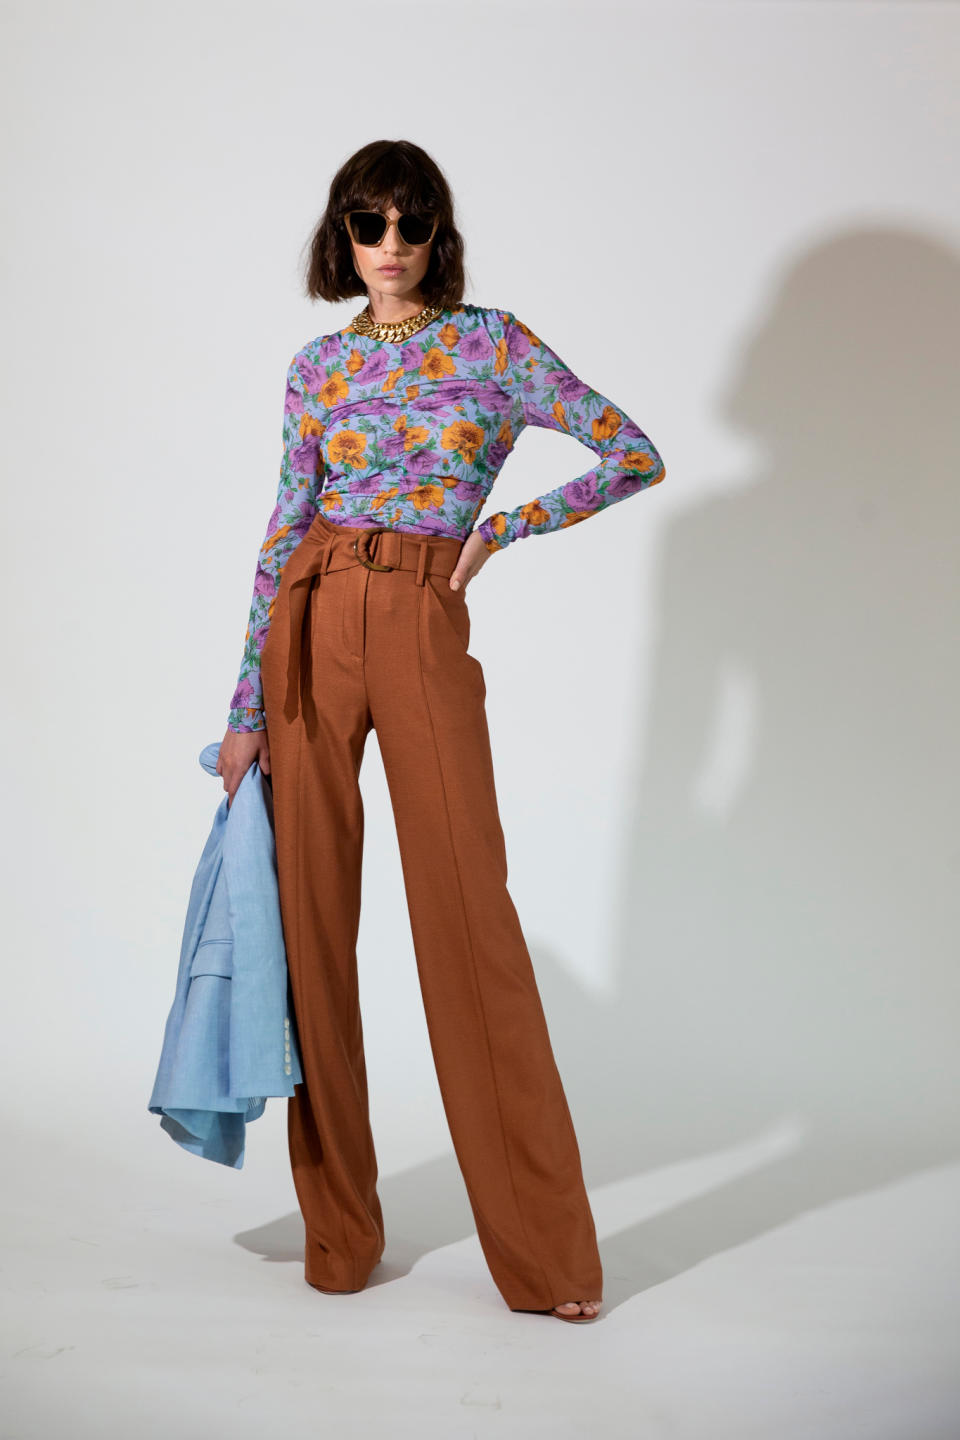 A preview look from the Veronica Beard RTW Spring 2023 collection.A spring look from Veronica Beard